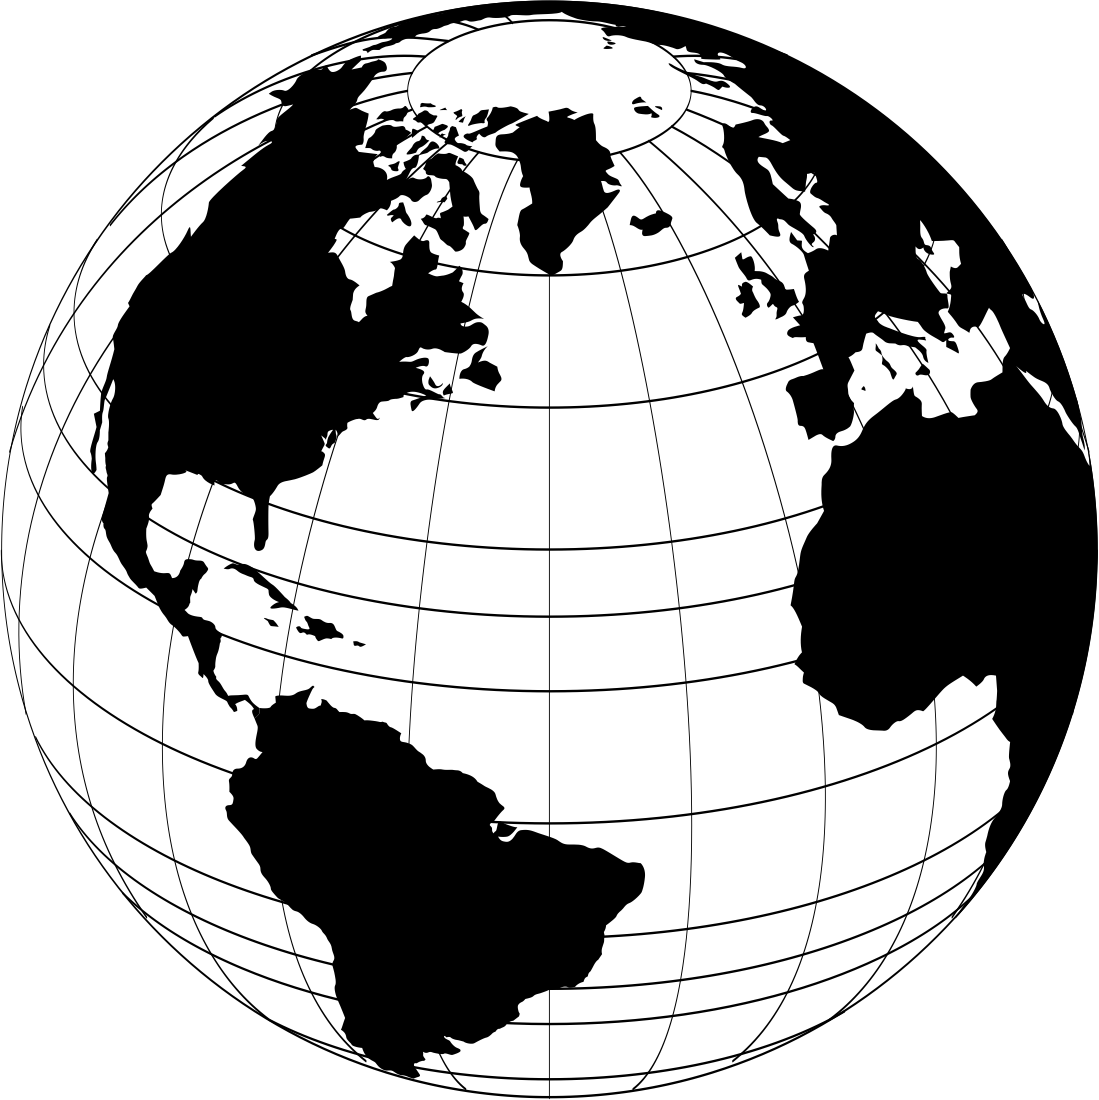 Download World Globe Vector Free Vector cdr Download - 3axis.co